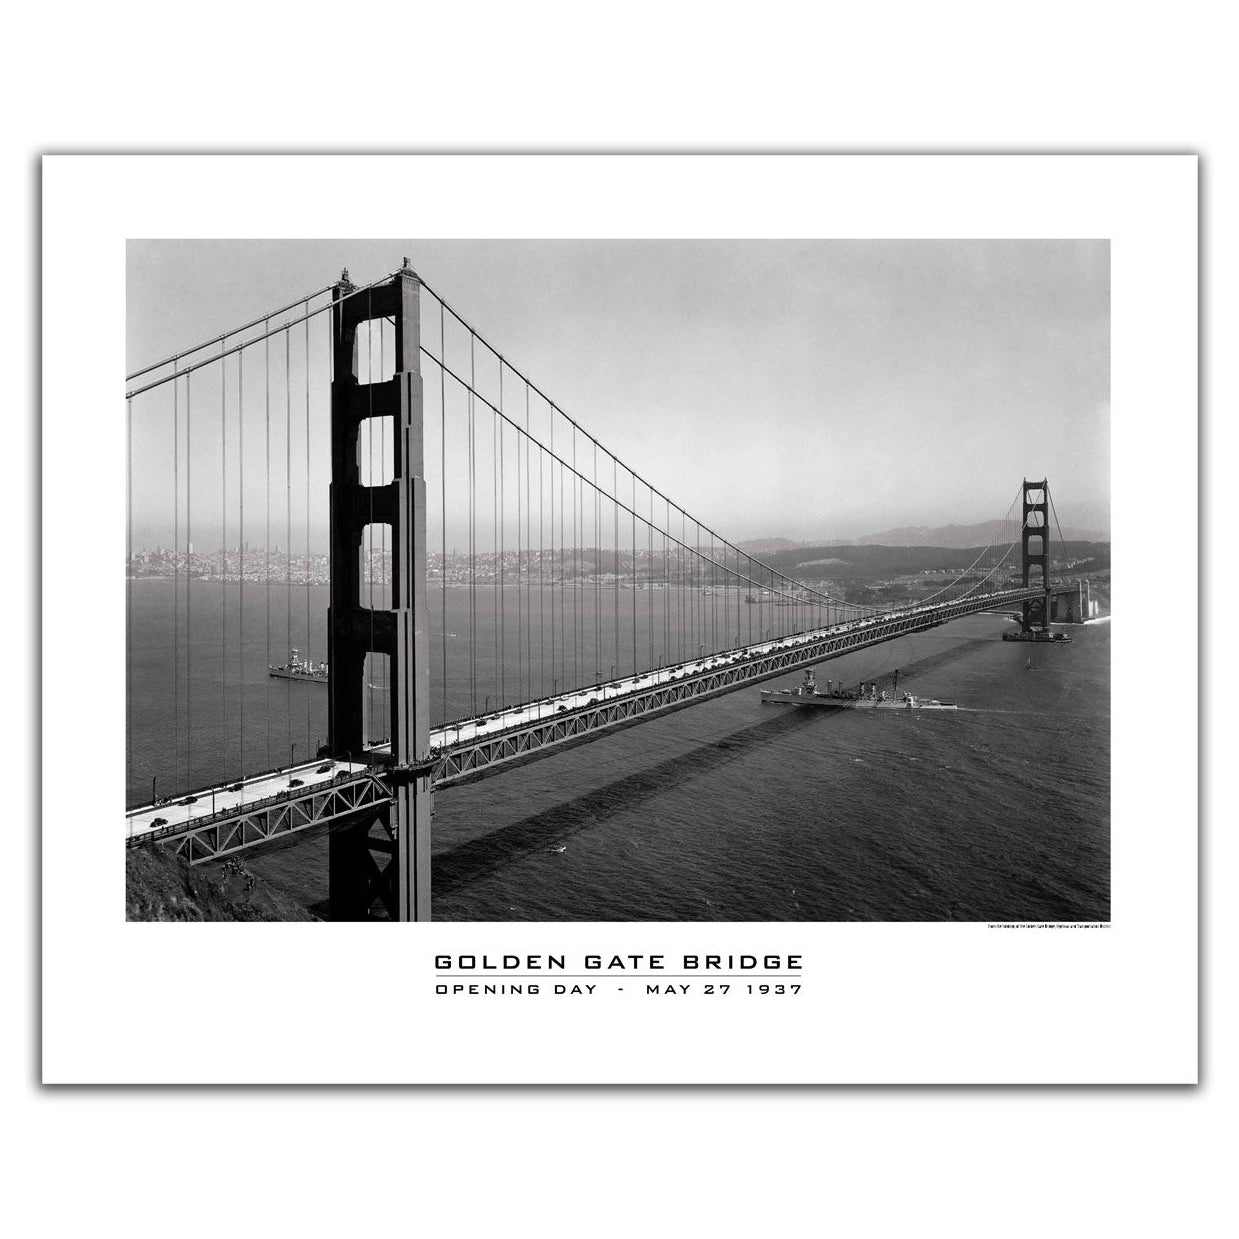 20 x 26 inch Golden Gate Bridge poster, featuring black-and-white historical photograph of span on opening day.